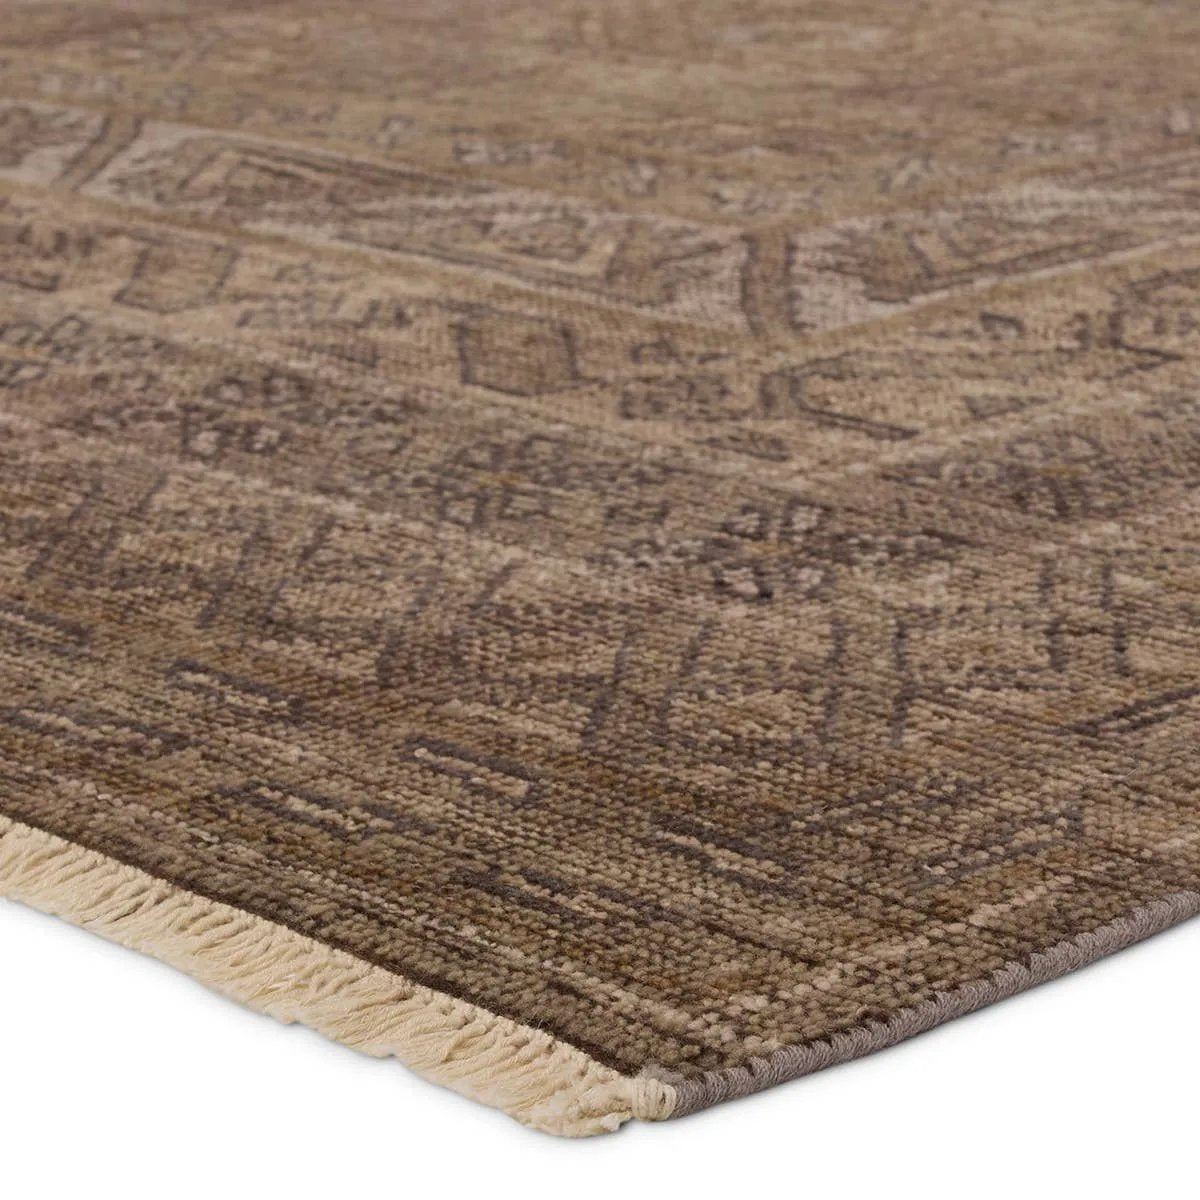 The Rhapsody Kortan features heirloom-quality designs of stunningly abrashed Old World patterns. The Kortan area rug boasts a beautifully distressed mini-medallion motif with a decorative, multi-layered border and geometric detailing. The brown, cream, and tan hues add depth and intrigue. Amethyst Home provides interior design, new home construction design consulting, vintage area rugs, and lighting in the Nashville metro area.